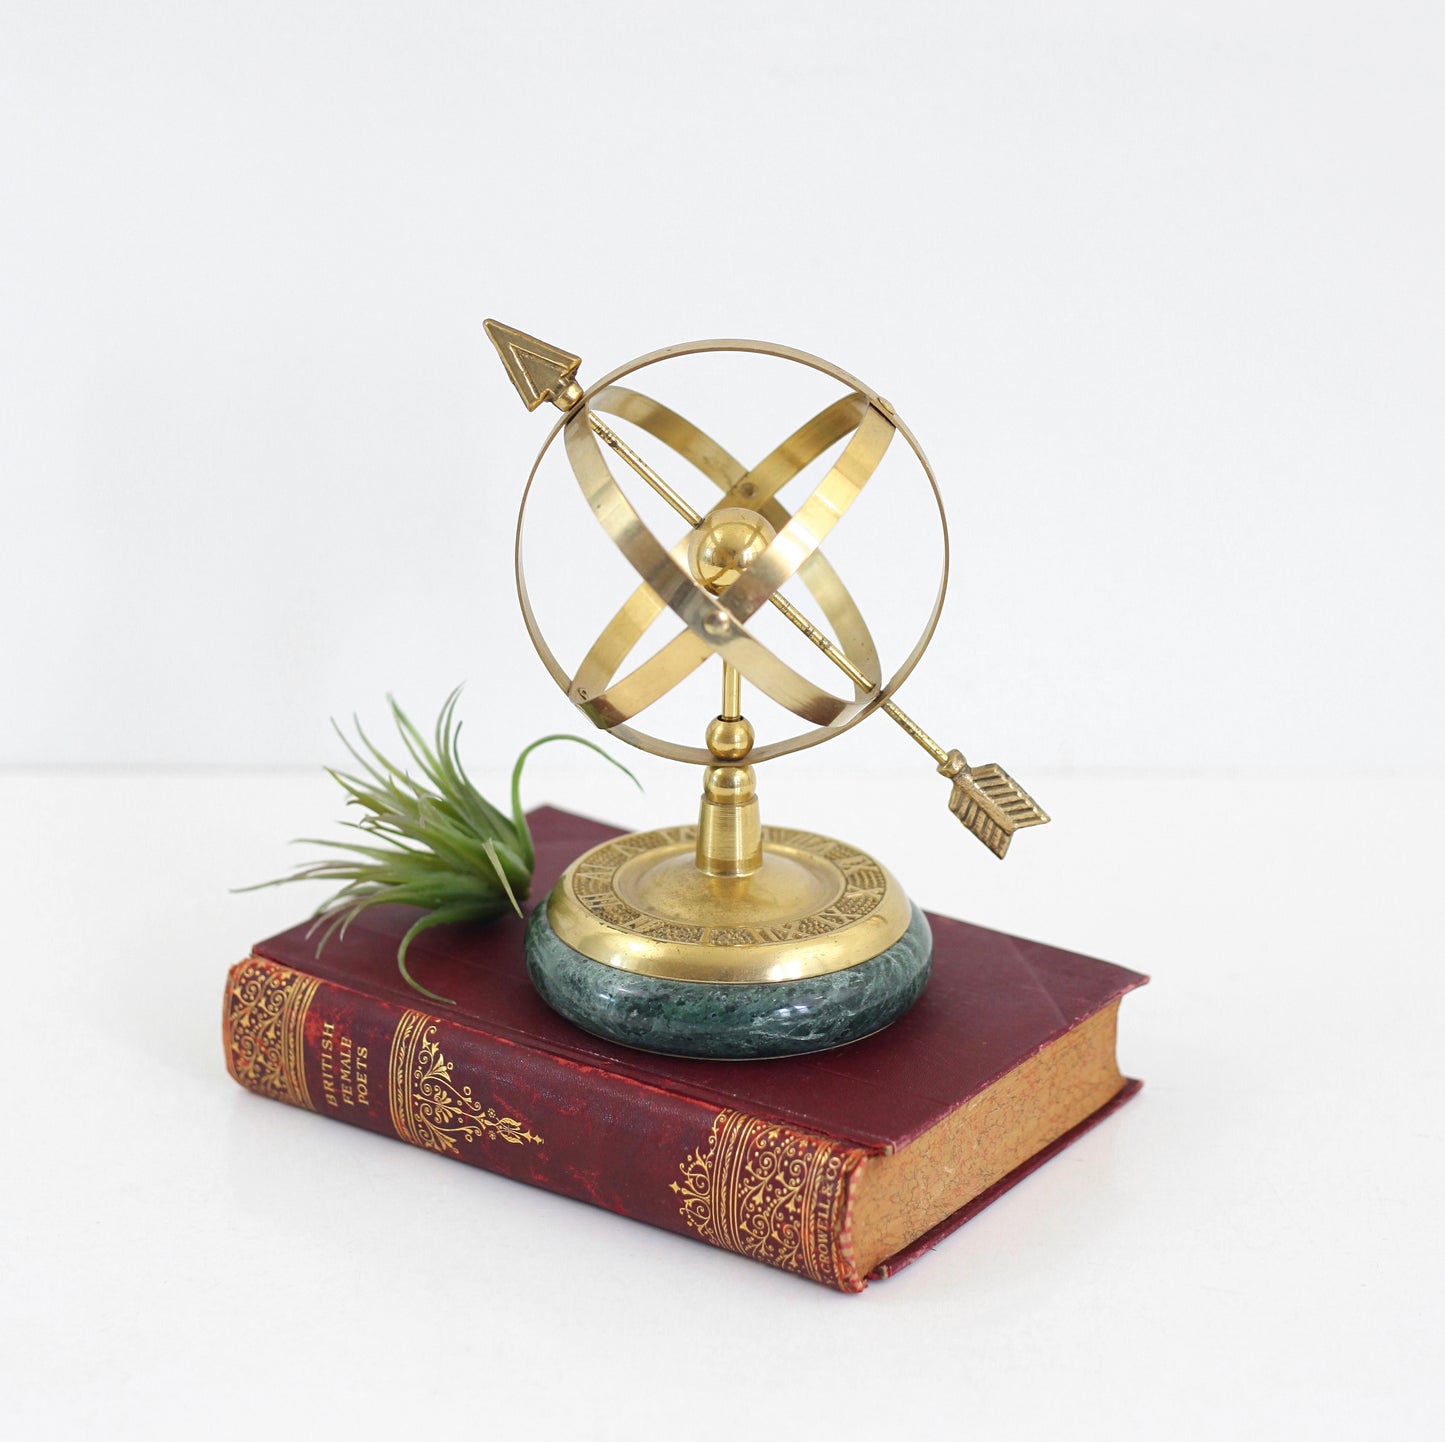 SOLD - Vintage Brass & Marble Armillary Sphere